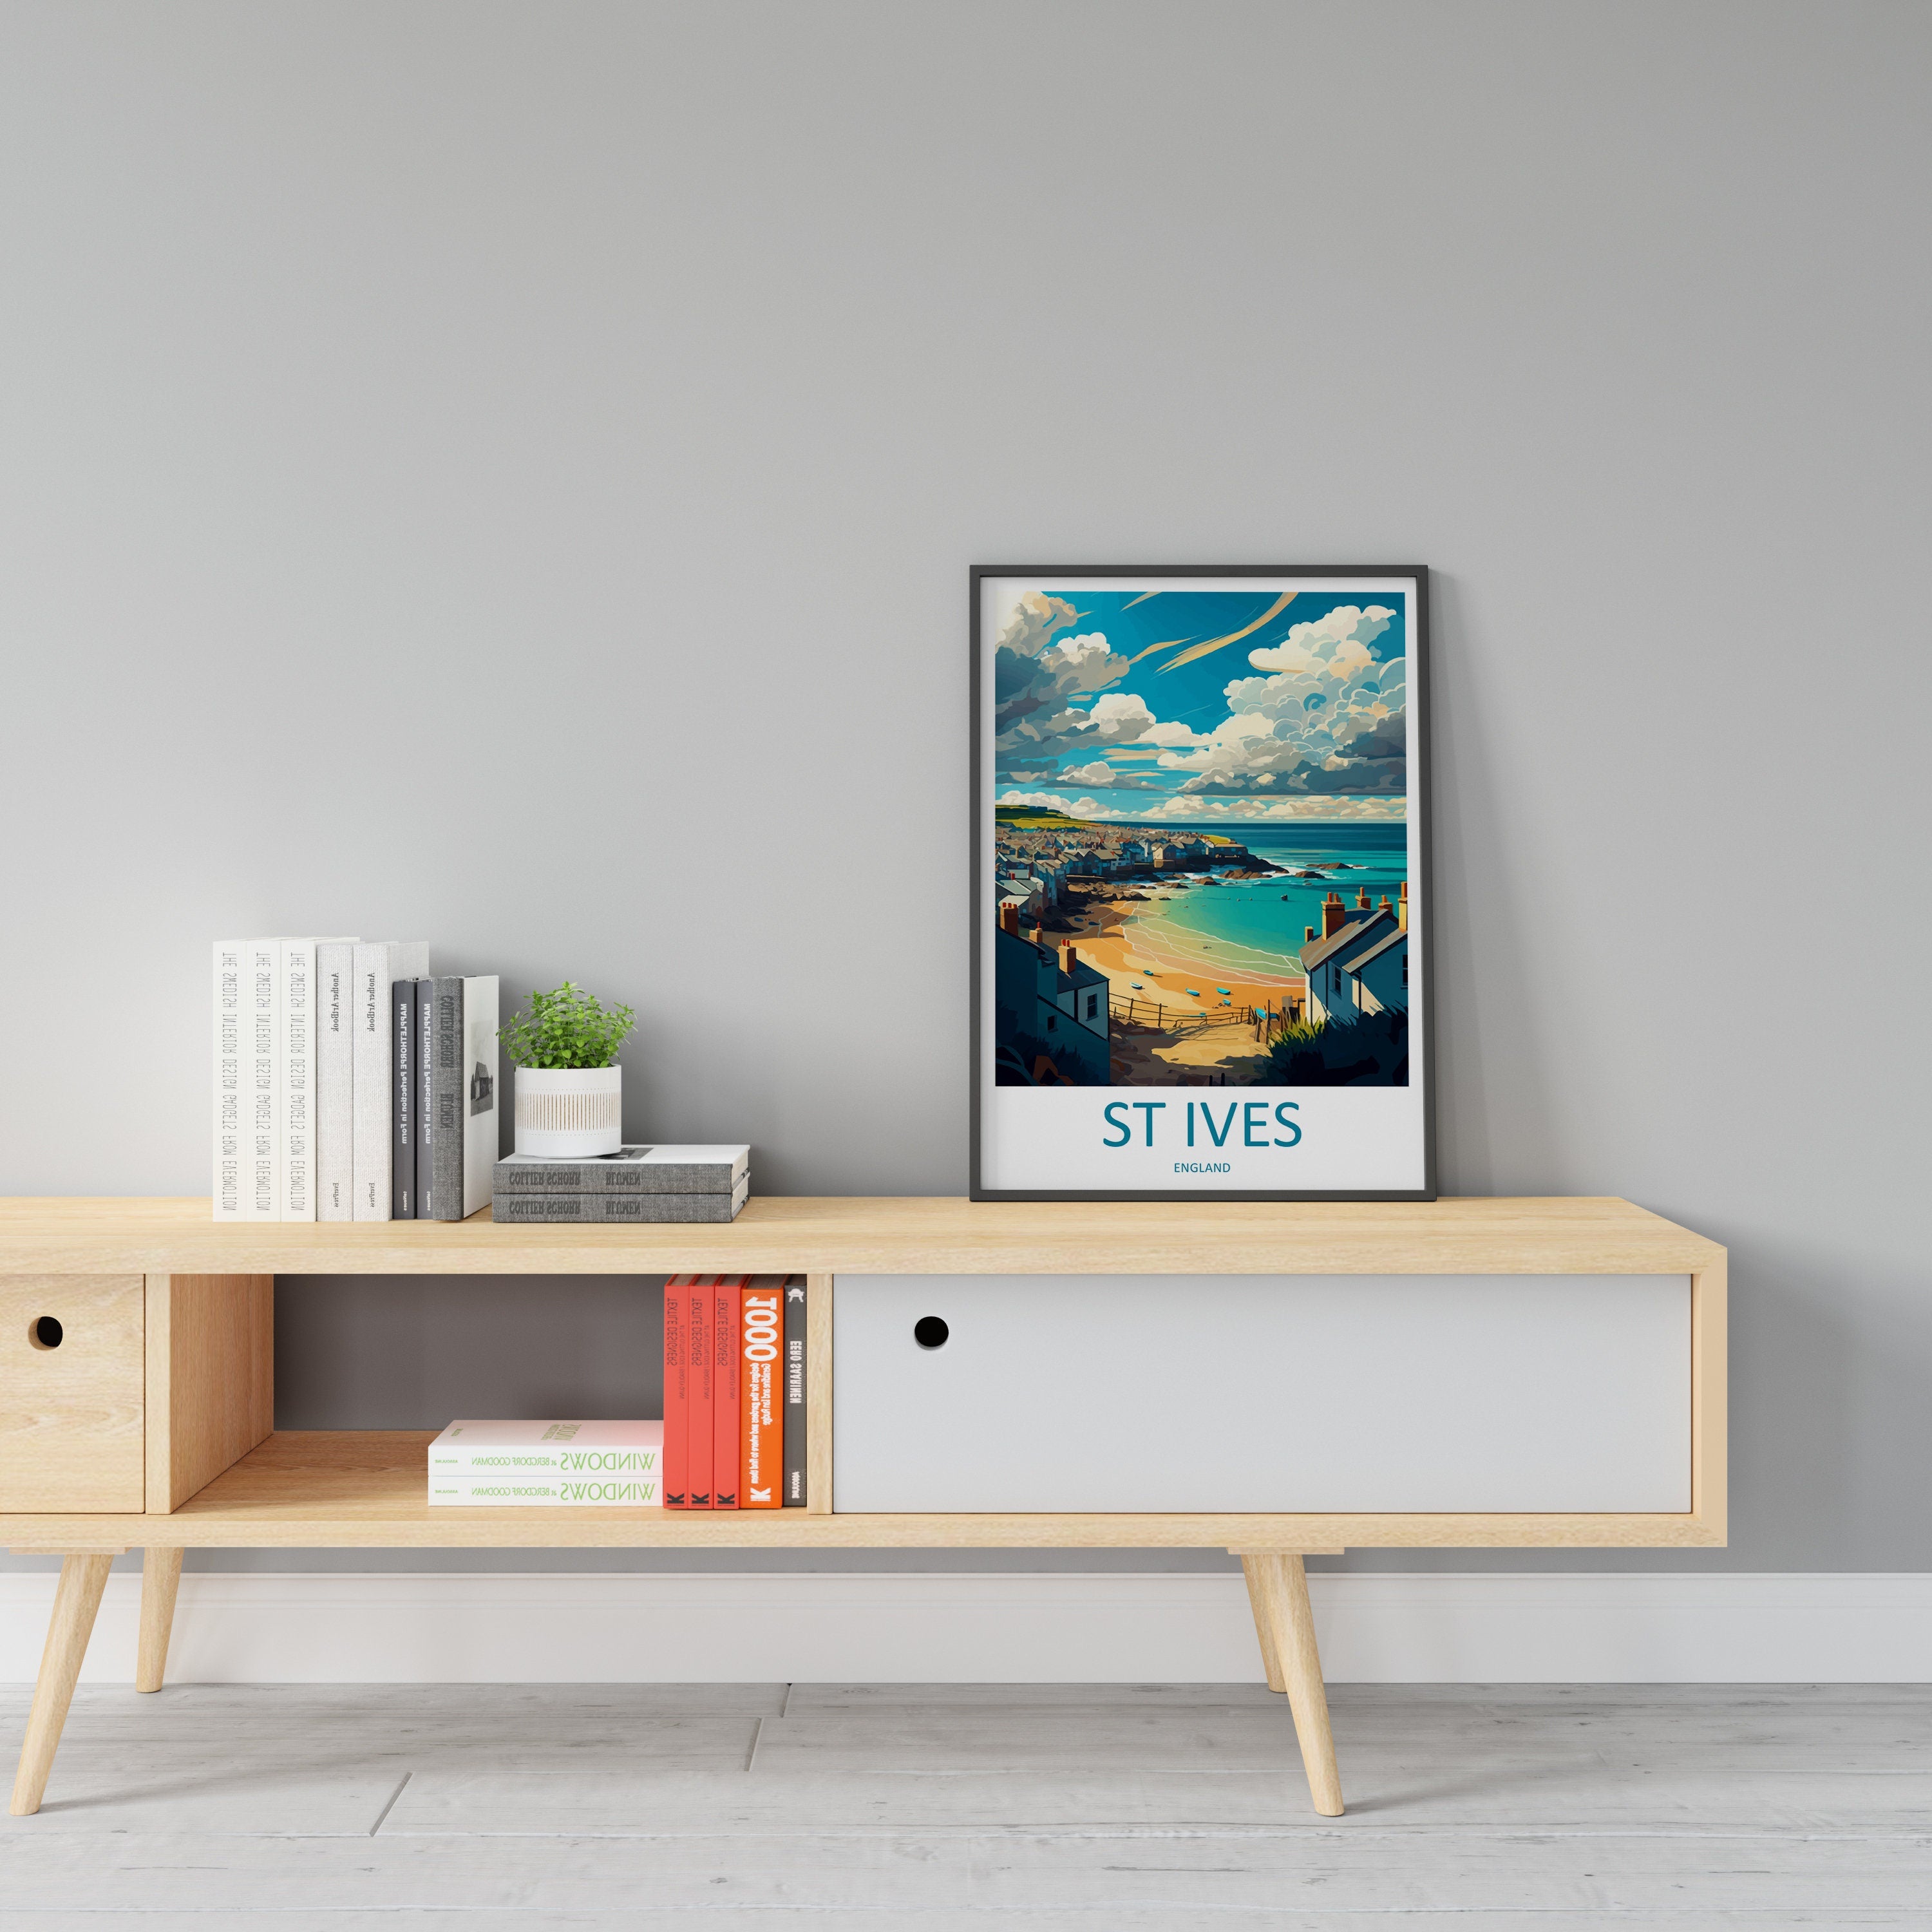 St Ives Travel Print Wall Art St Ives Wall Hanging Home Décor St Ives Gift Art Lovers England Art Lover Gift St Ives Travel Souvenir